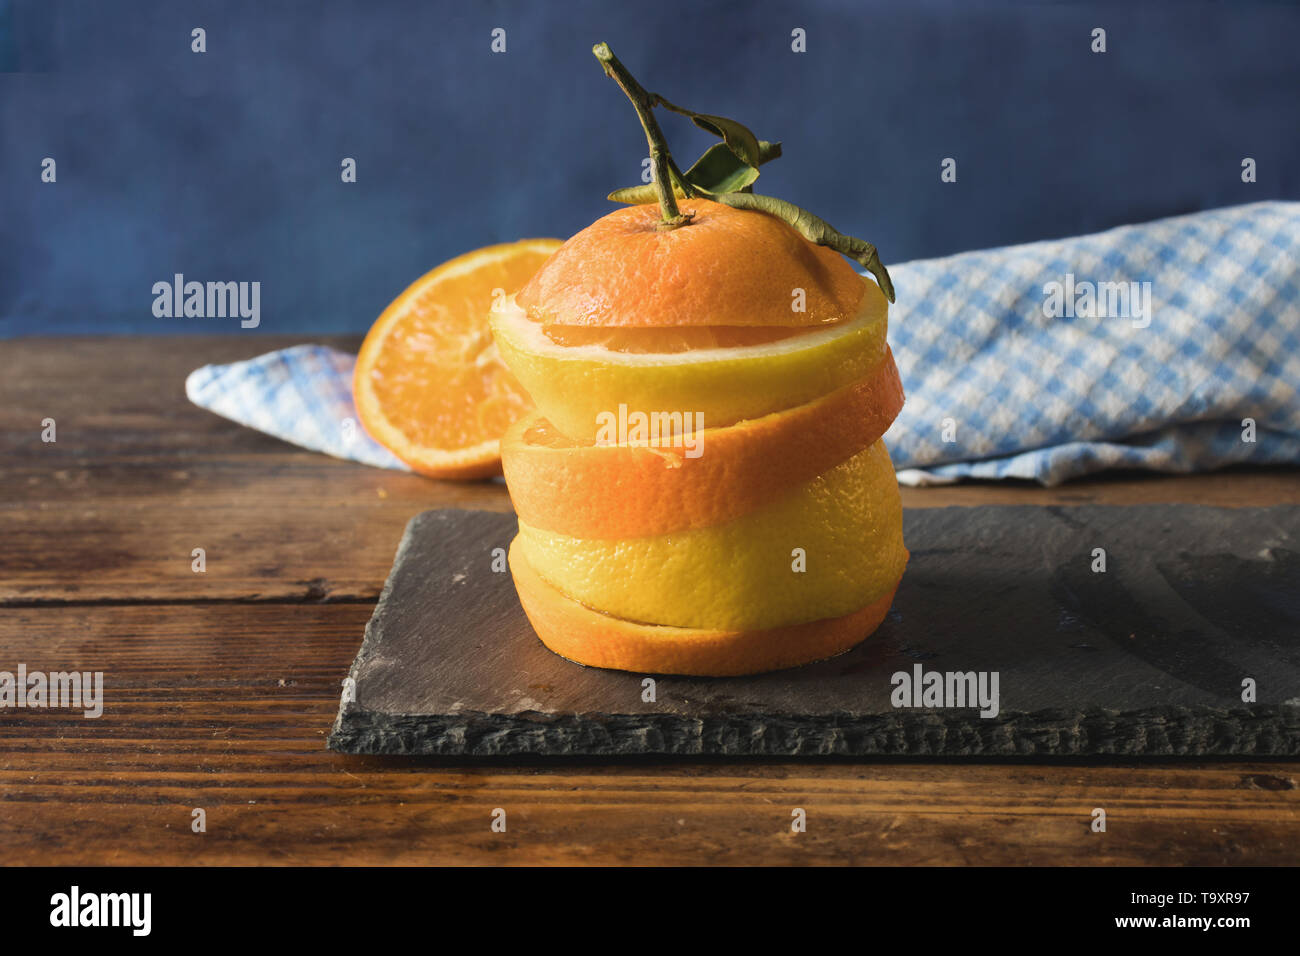 Sliced lemons and oranges stacked, on a slate table on an old wooden table Stock Photo